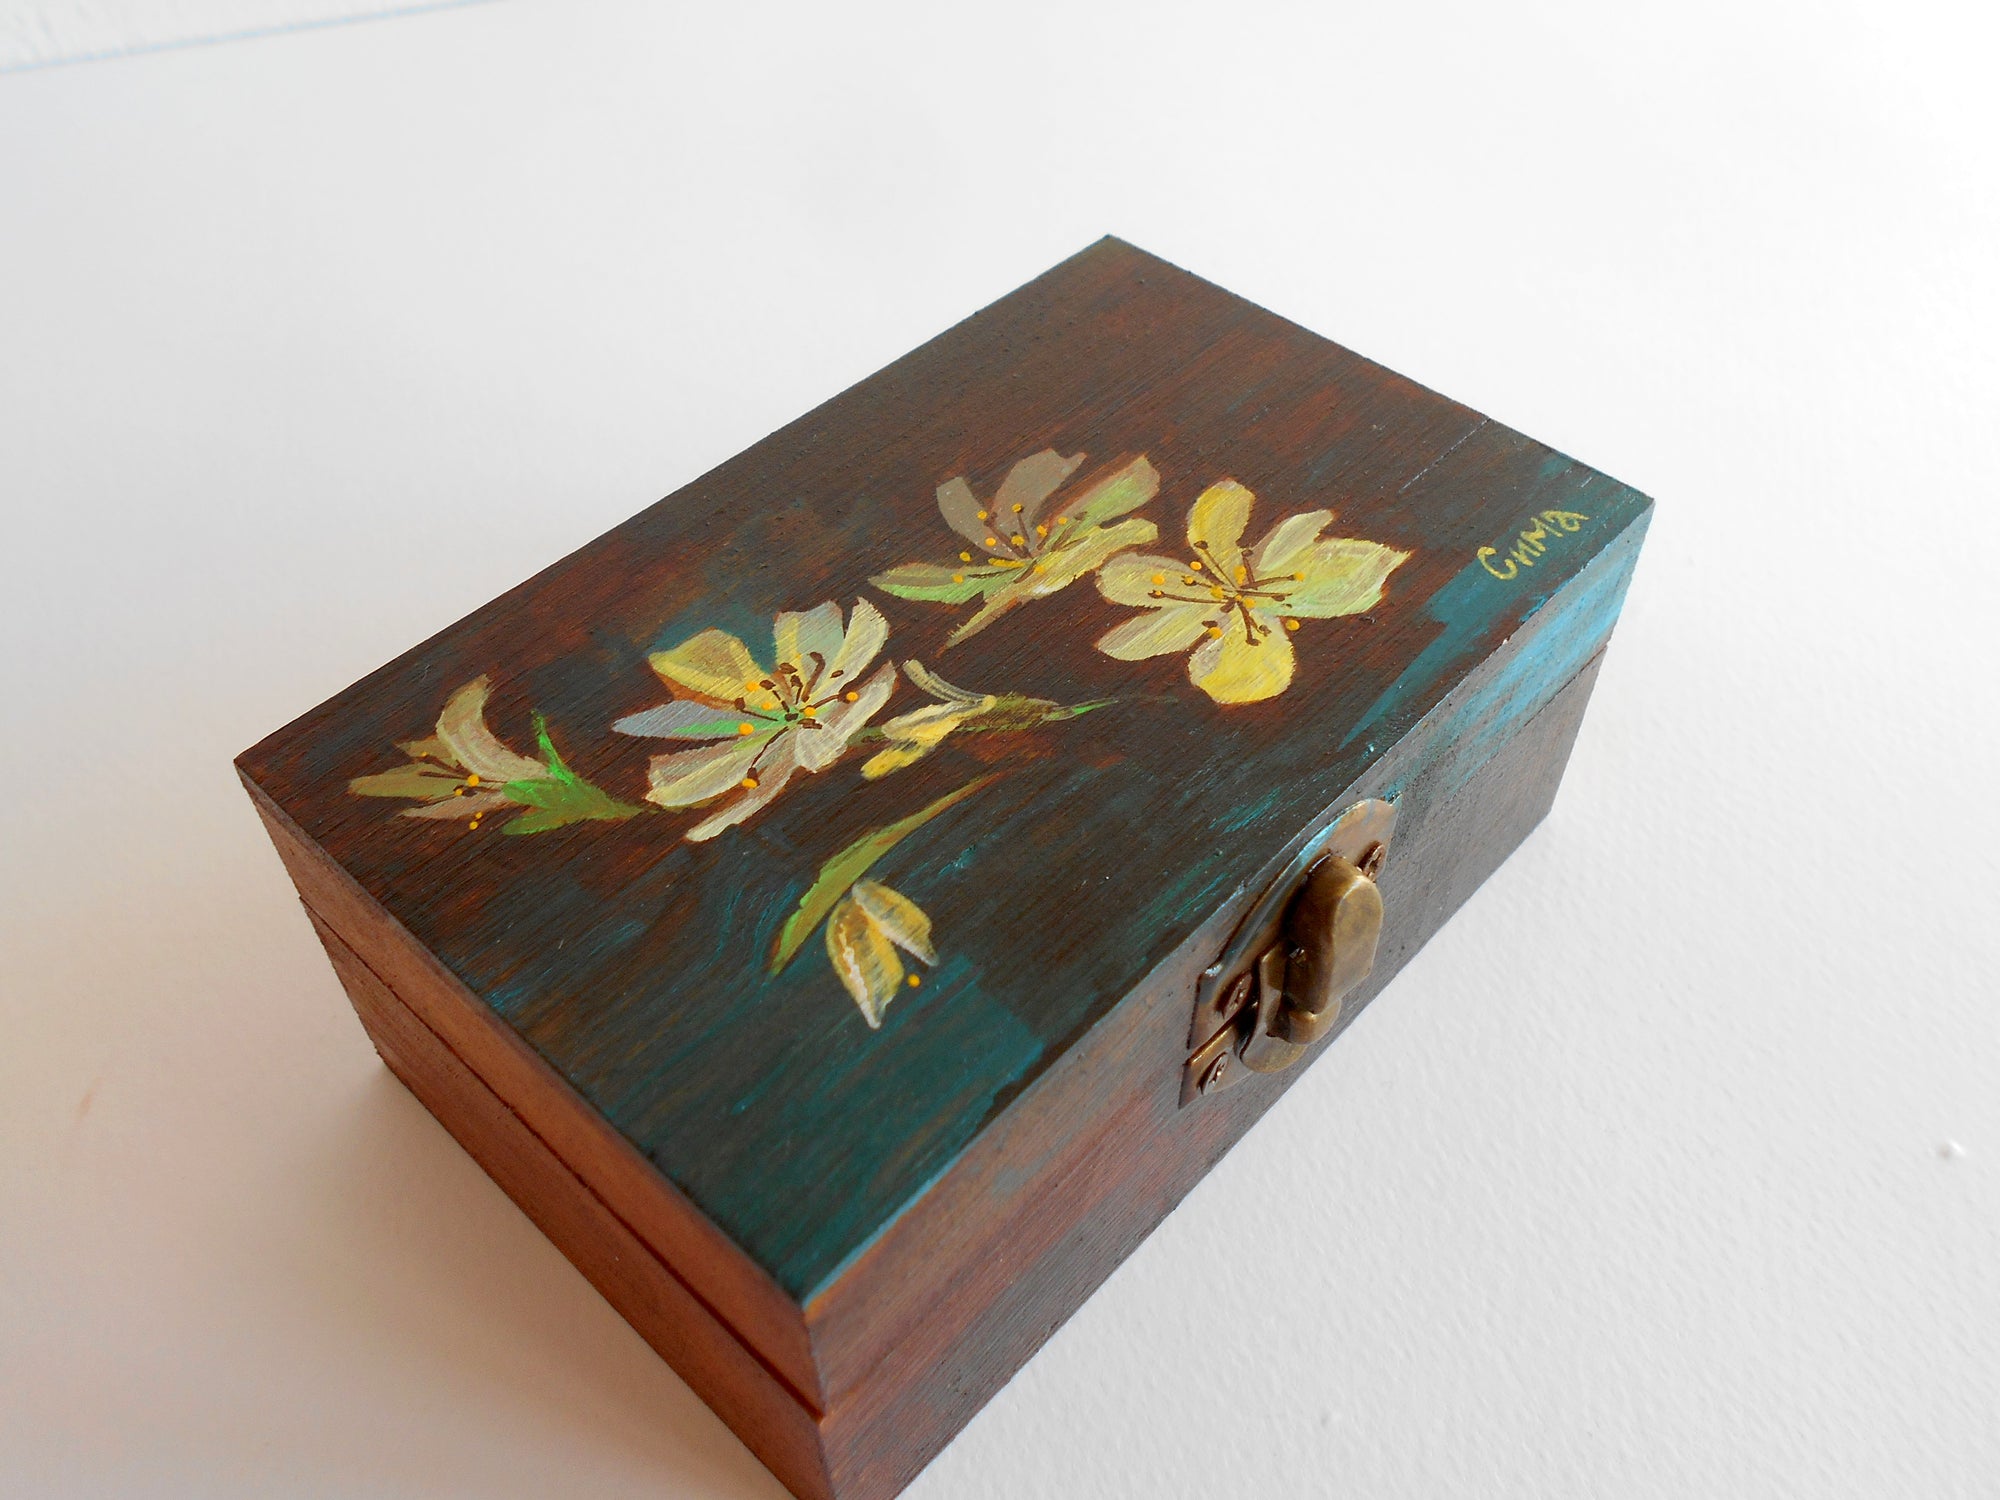 Flower art wooden jewelry box- acrylic painted rectangular box- wooden box with bronze colored hinges- fir tree wood box